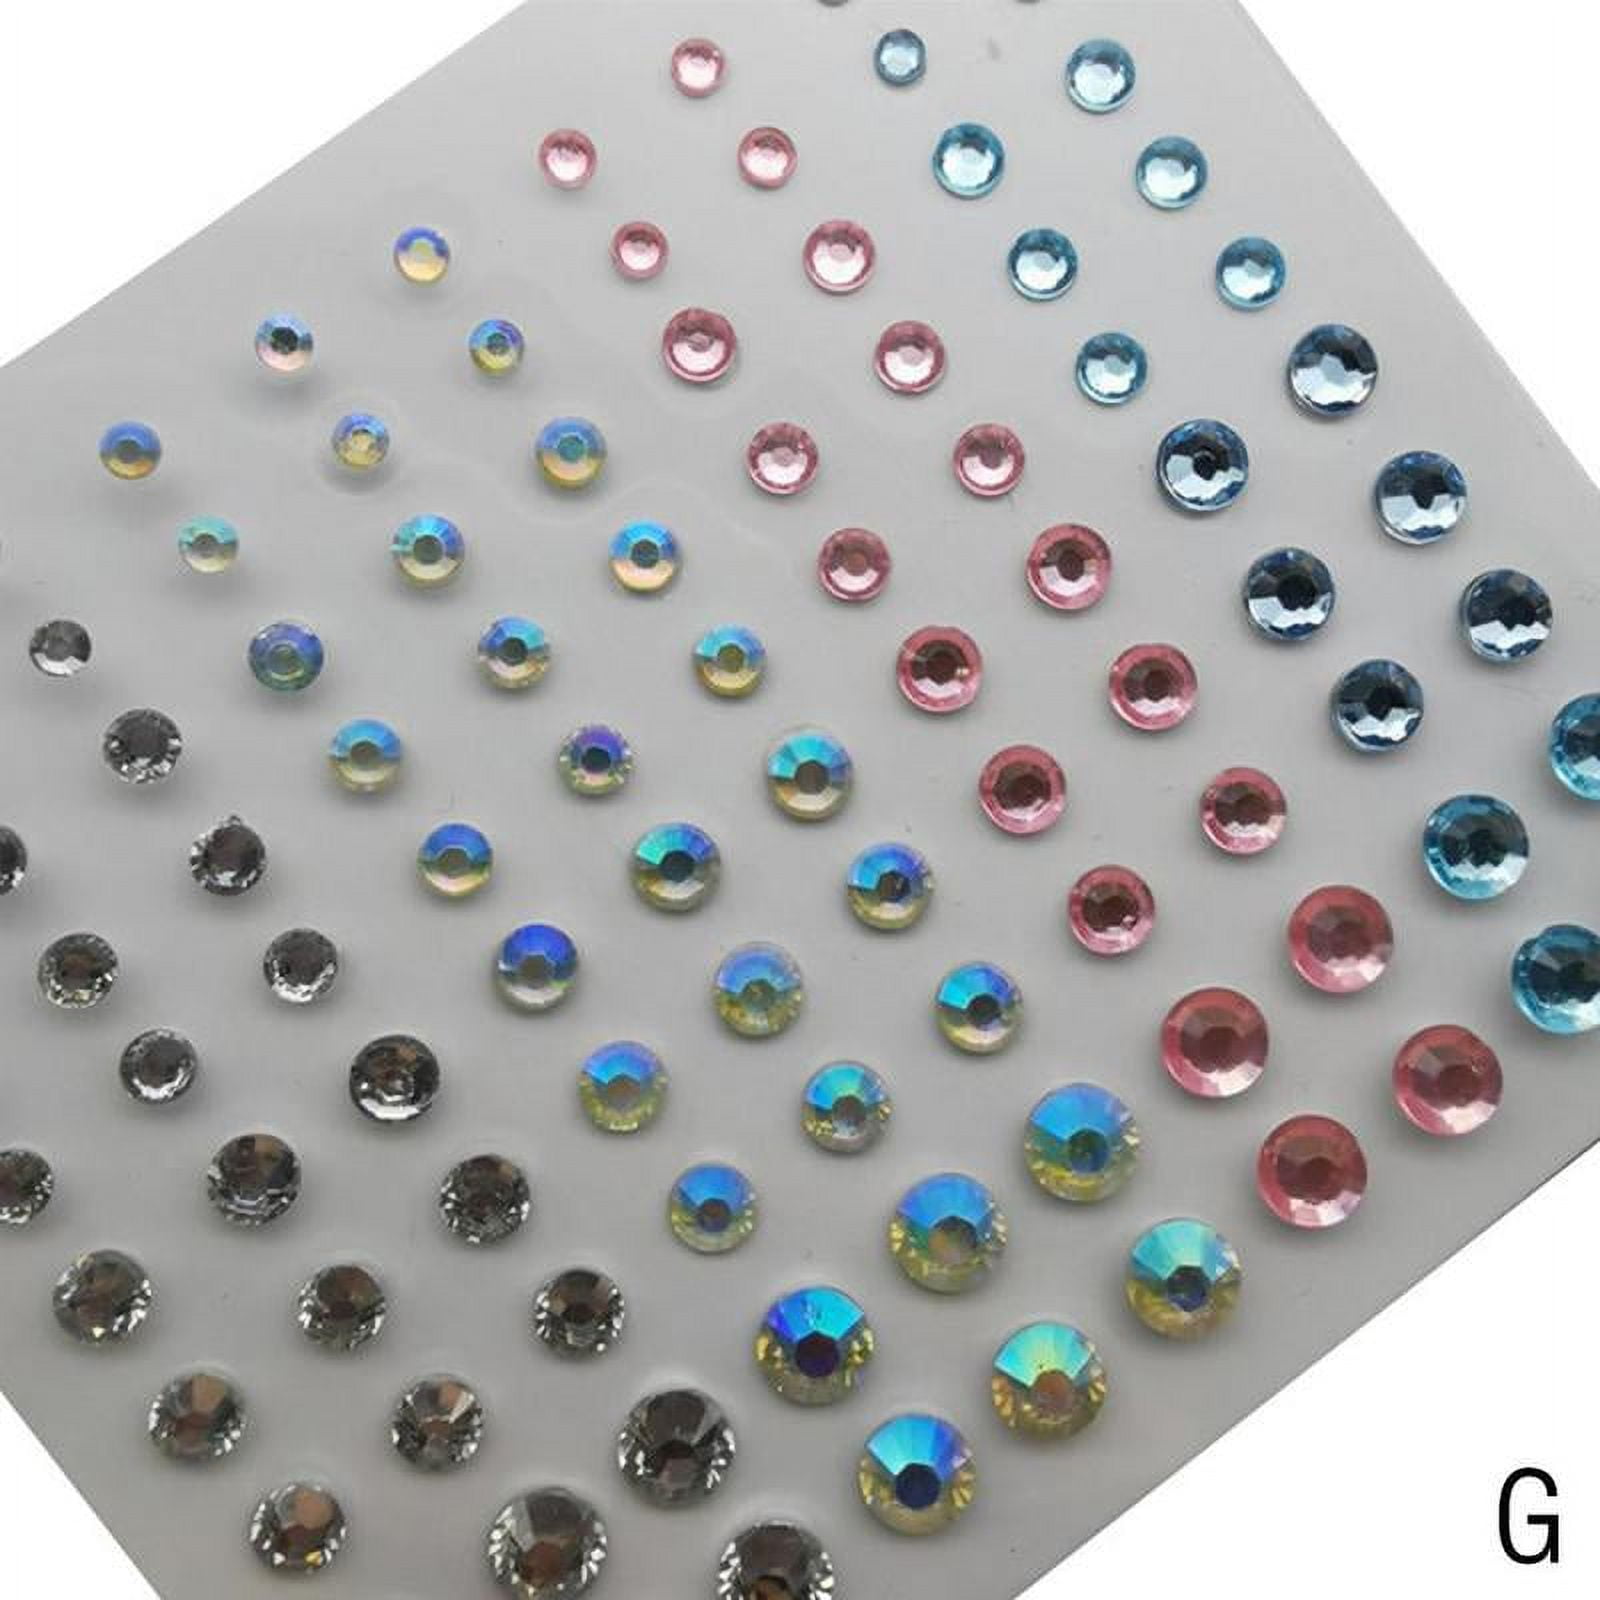 Rhinestone Stickers, Self Adhesive Jewel Stickers, Bling Gems for Crafts, Stick  on Gems for Makeup, DIY, Eye, Nail,Combination 2 